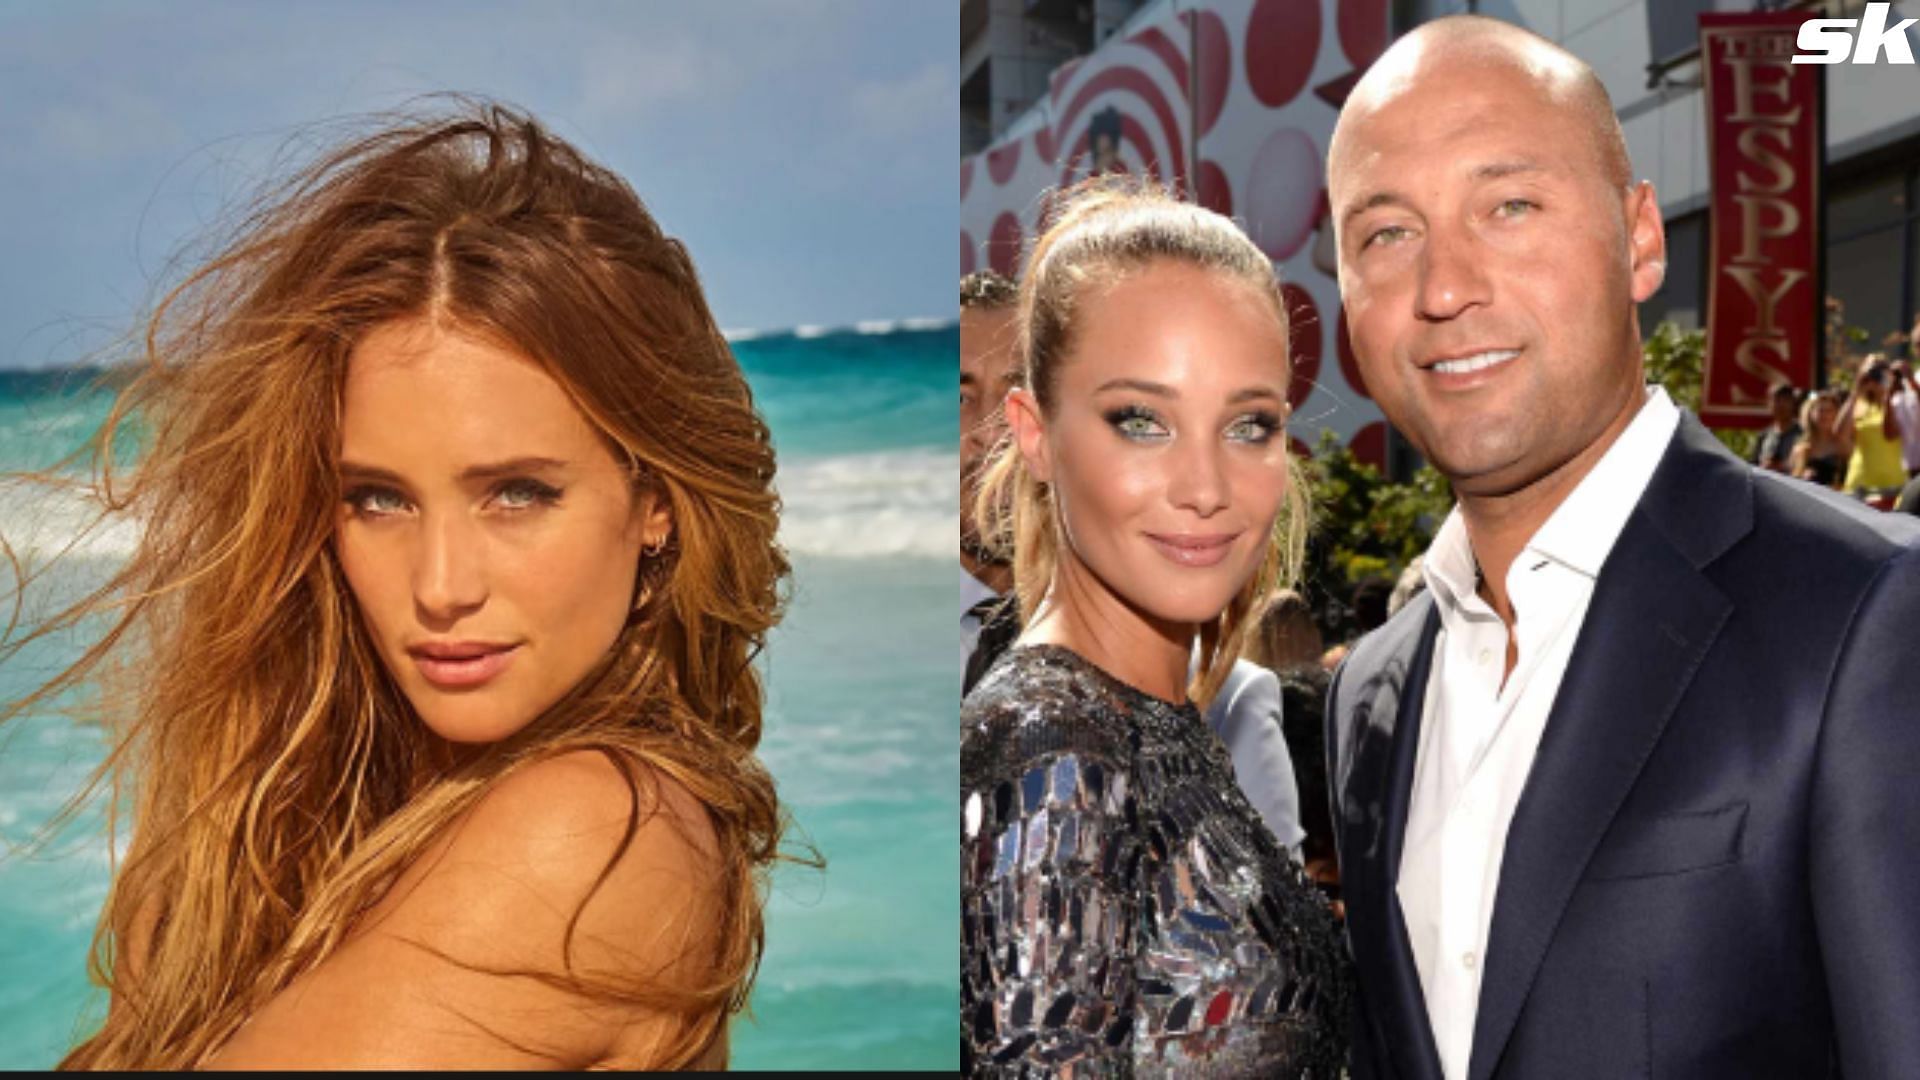 When Hannah Jeter brought her SI cover appearance into light amidst a  barrage of Derek Jeter queries